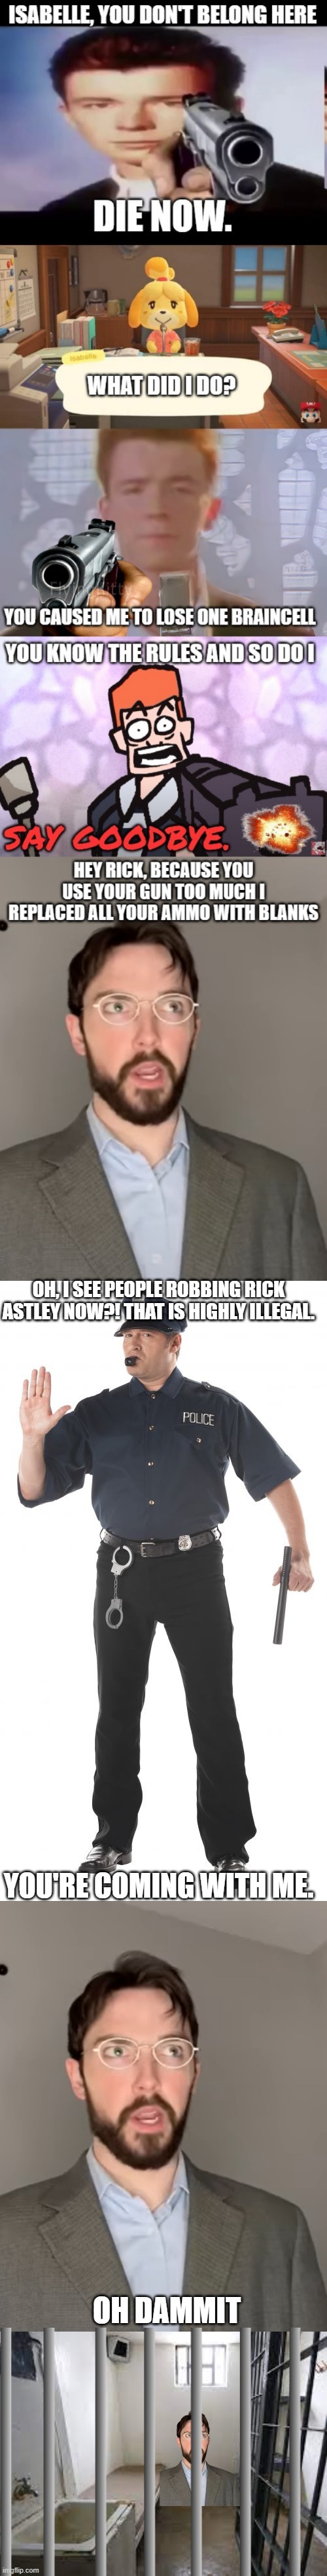 OH, I SEE PEOPLE ROBBING RICK ASTLEY NOW?! THAT IS HIGHLY ILLEGAL. YOU'RE COMING WITH ME. OH DAMMIT | image tagged in memes,stop cop,justin case,prison cell | made w/ Imgflip meme maker